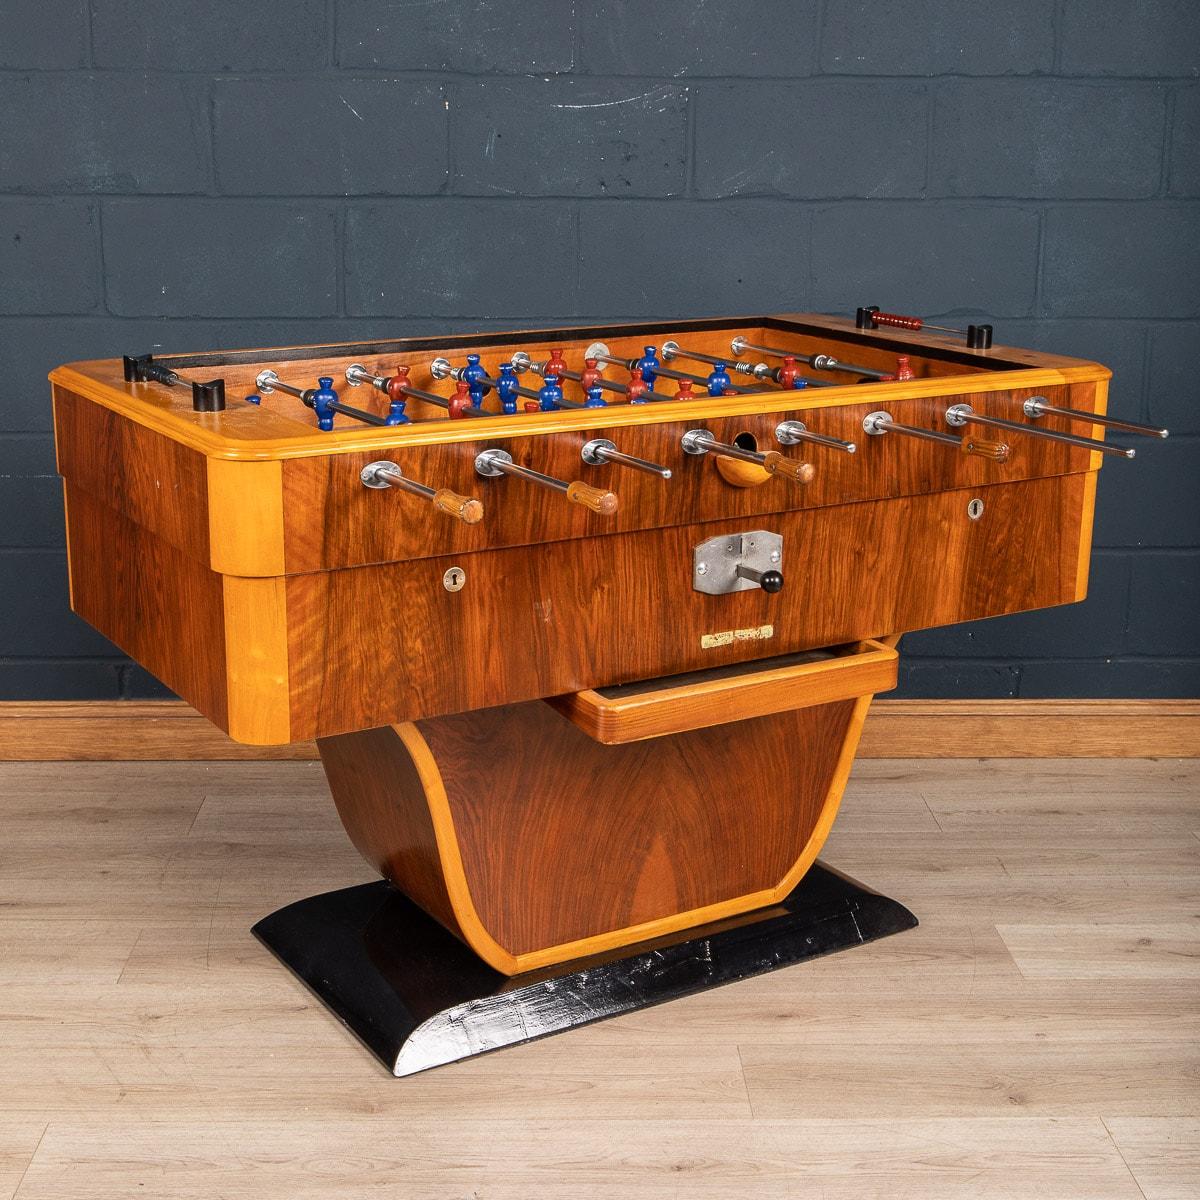 A truly striking table football table made in Italy around the middle of the 20th century. The strong Art Deco structure has a wonderful two-tone wood veneer, a glass playing surface and retaining some superb original features like the coin operated